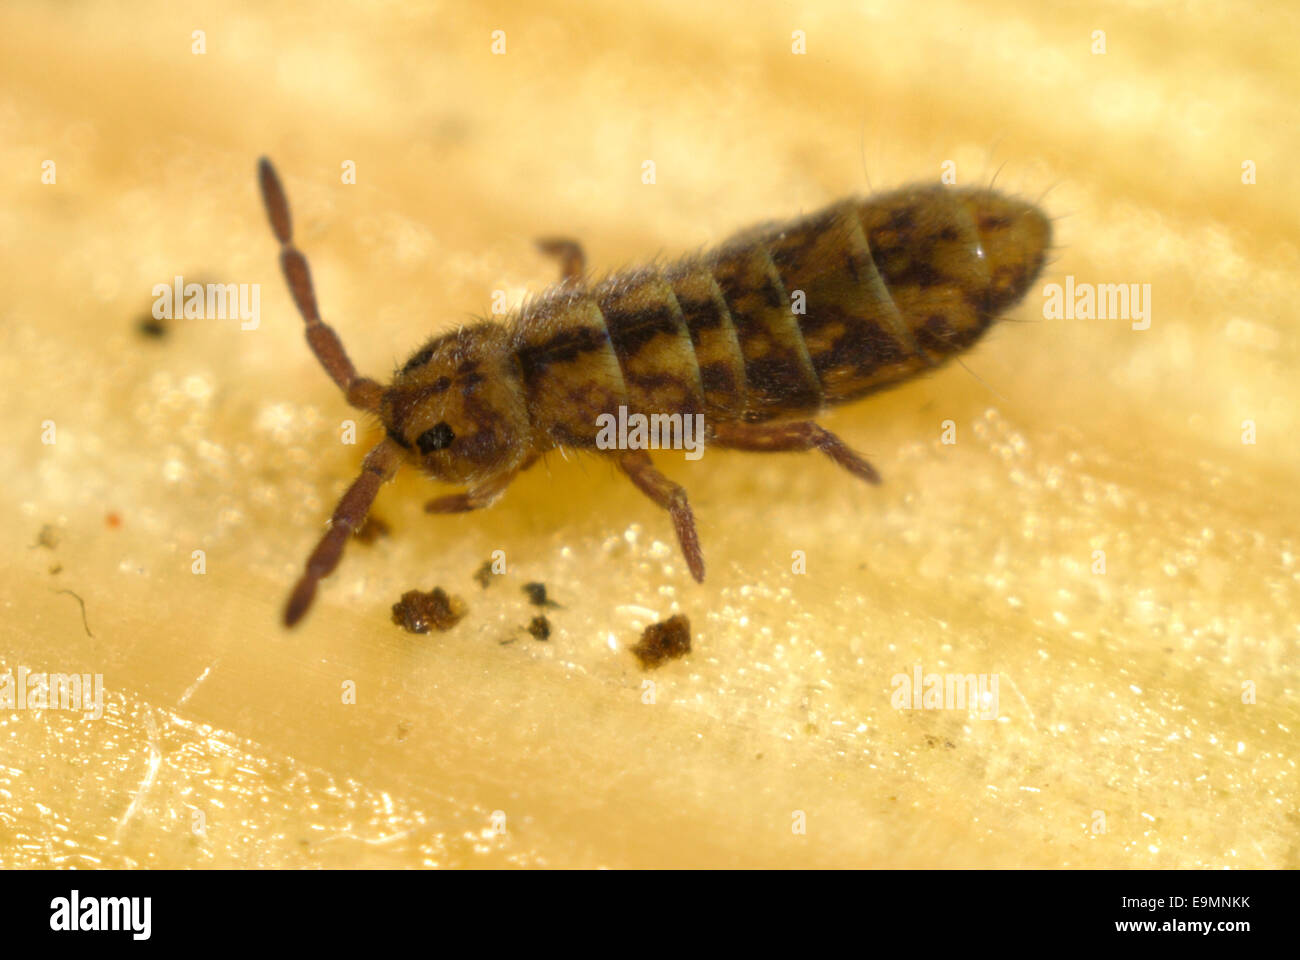 A marsh springtail, Isotomurus palustris, on a water lily pad Stock Photo